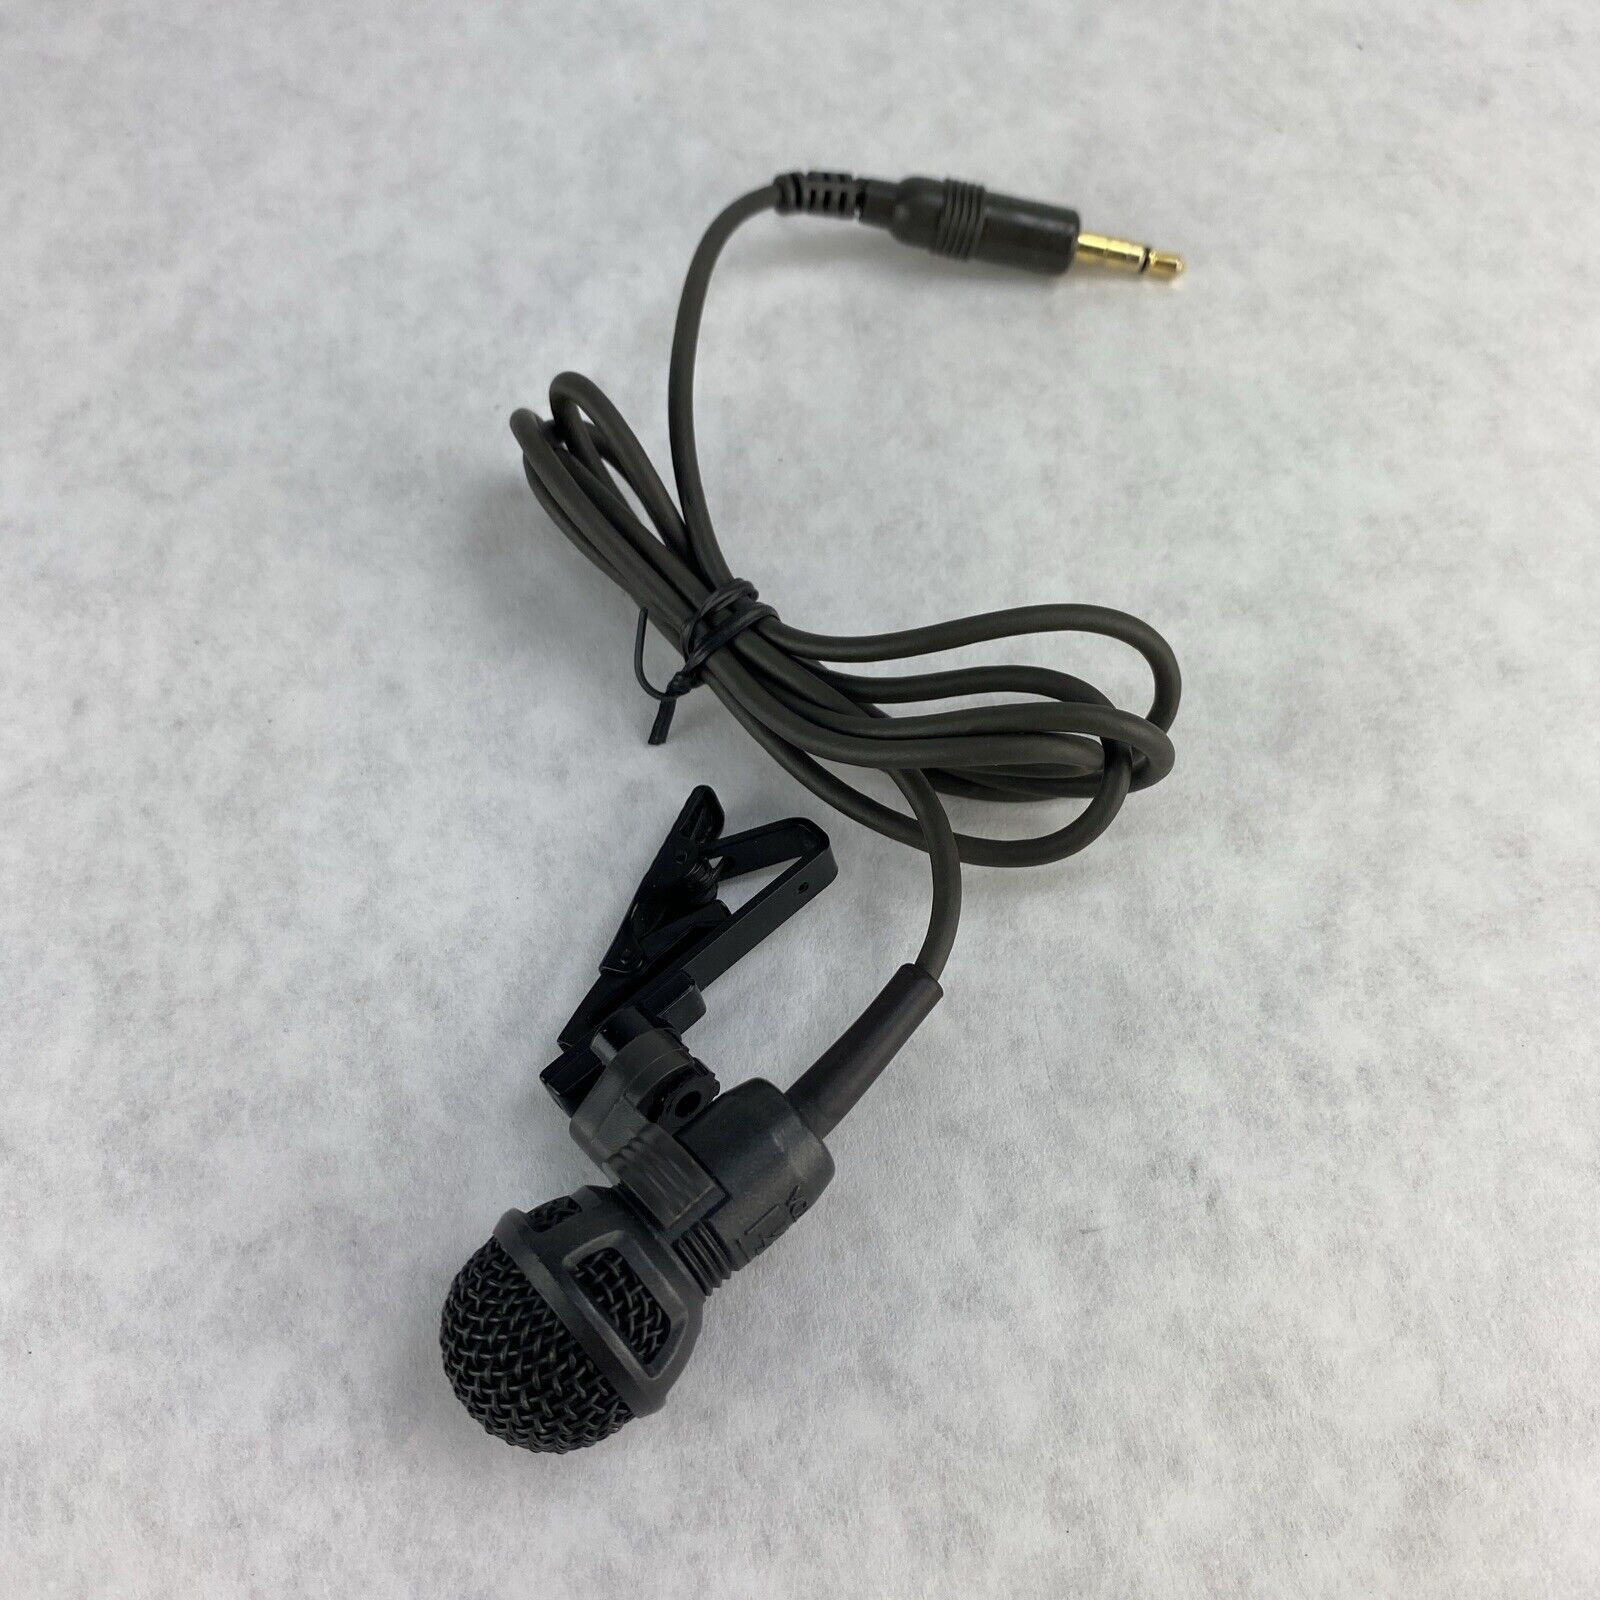 TOA WM-370 Microphone And Bodypack Transmitter  Tested